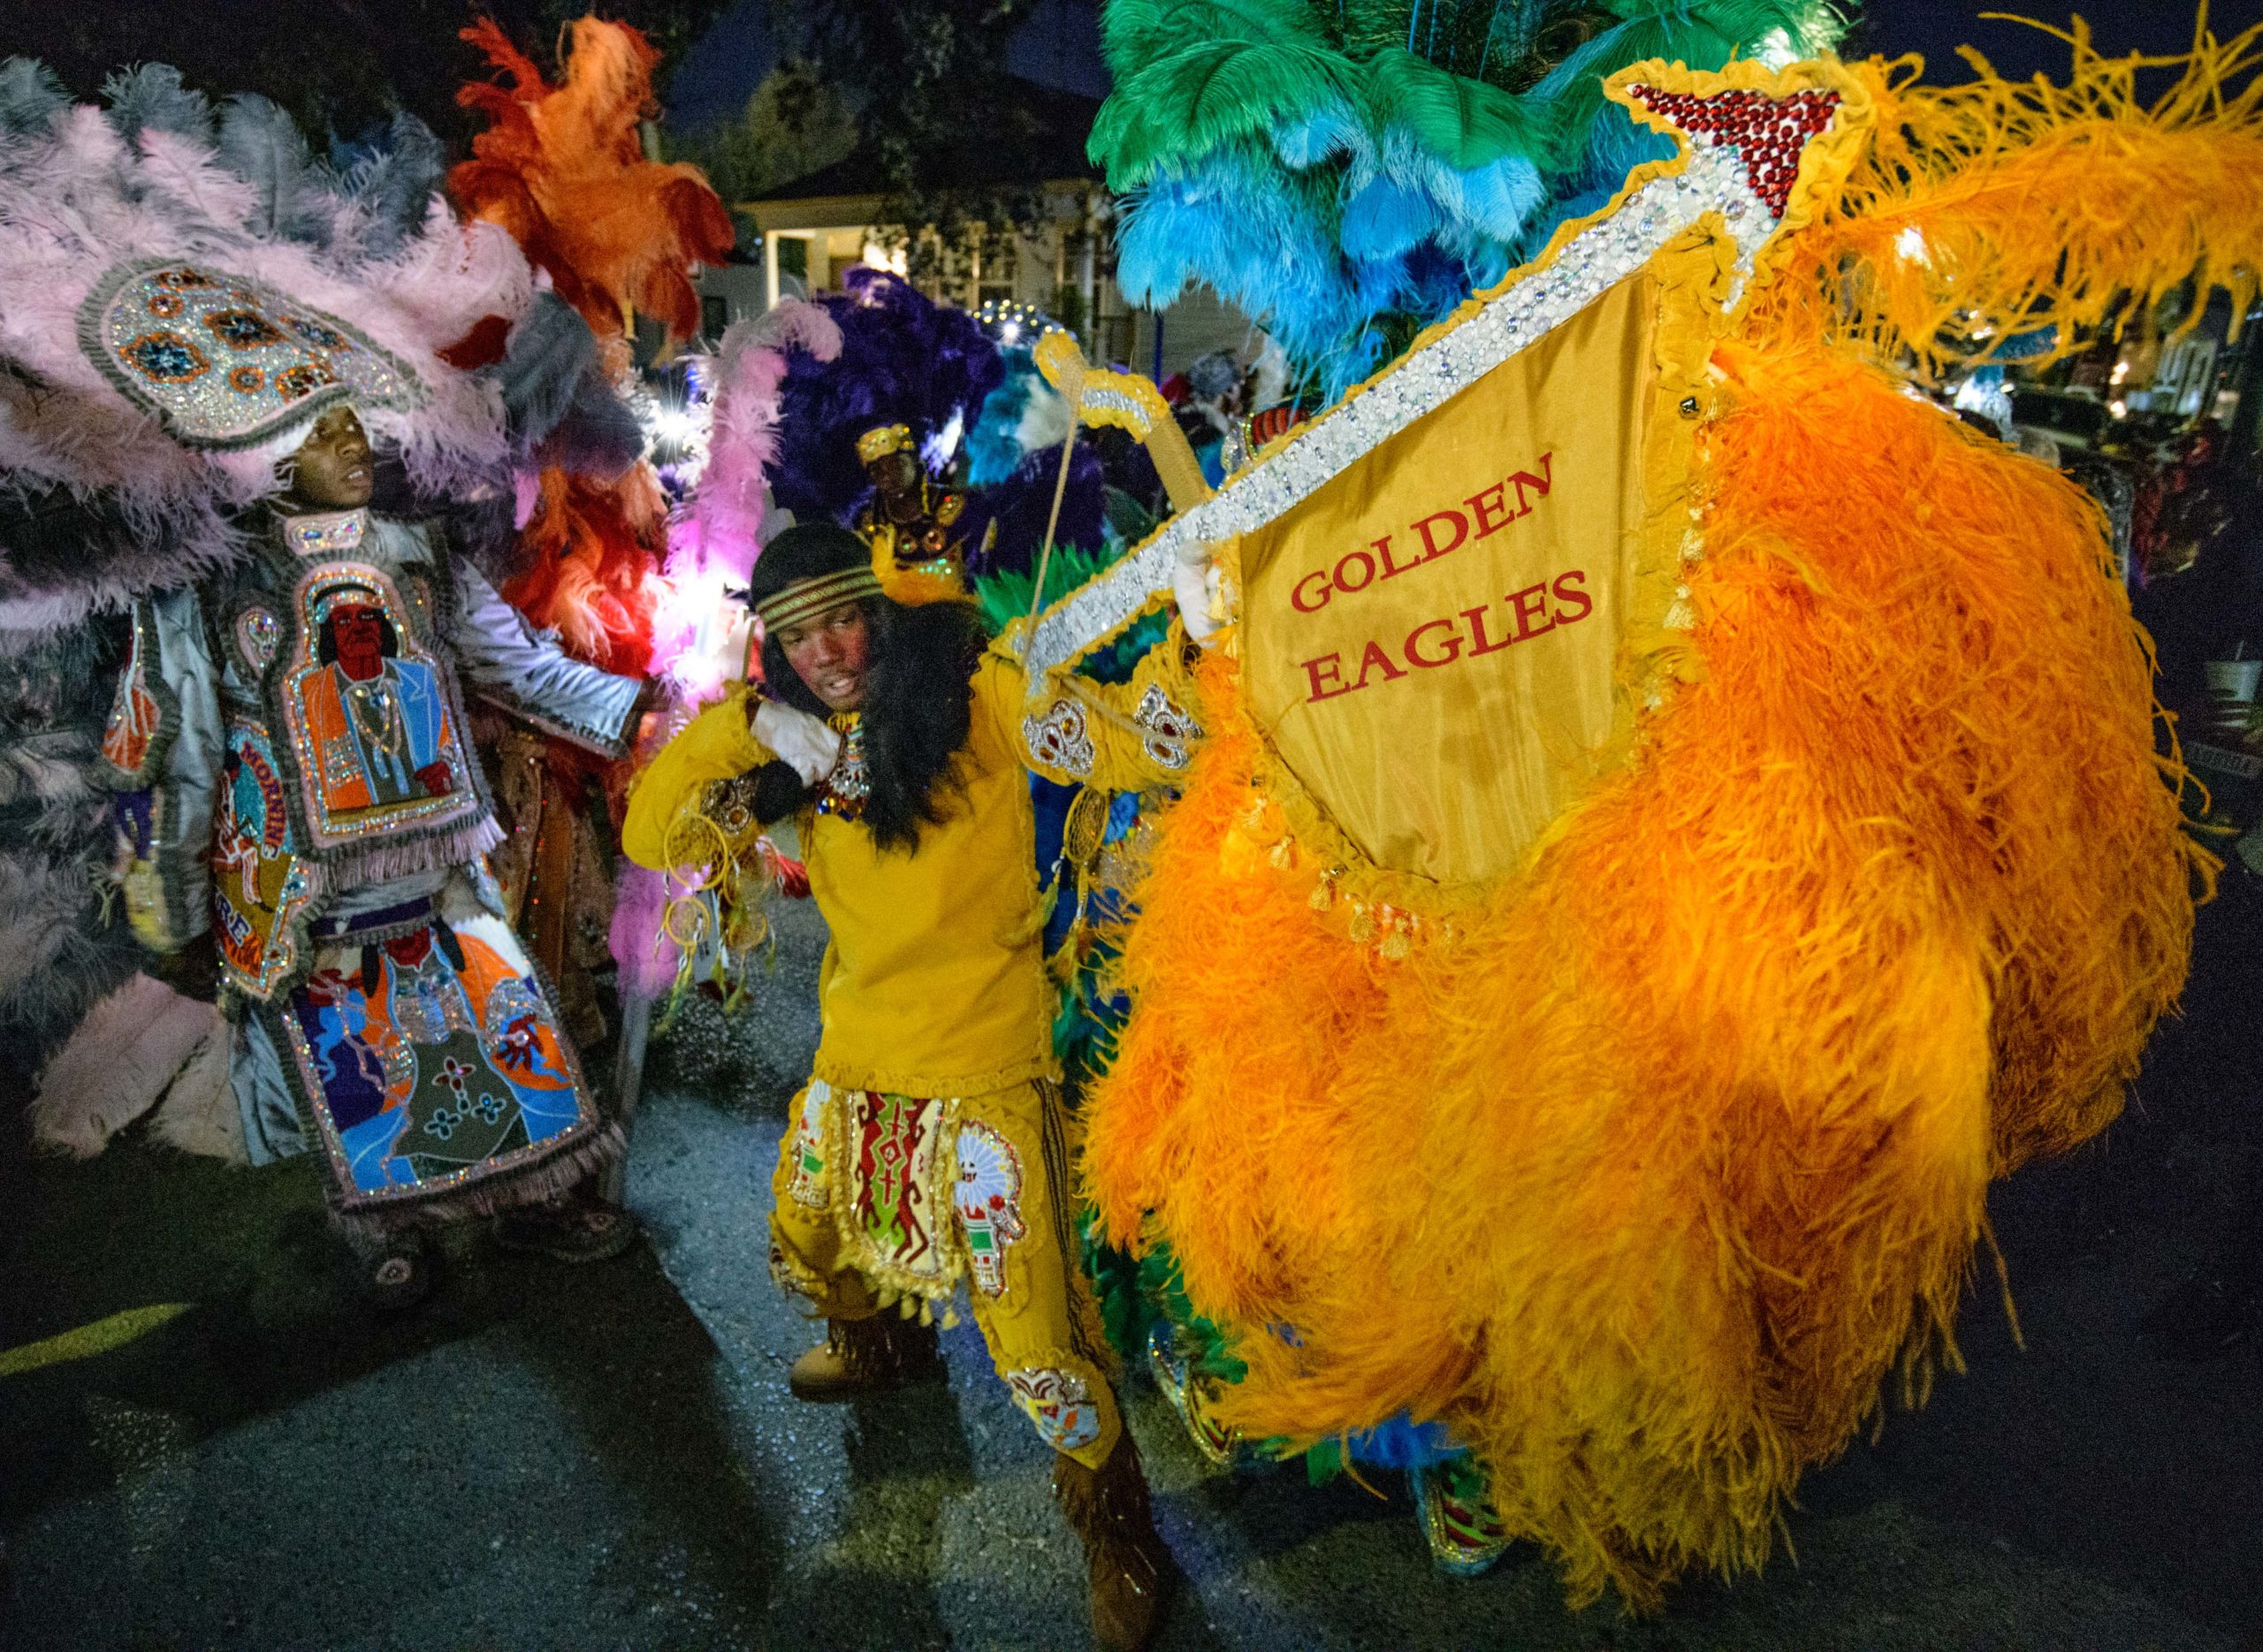 Mardi Gras Indians including the Golden Eagles come out on St. Joseph's Night on Washington Ave. near A. L. Davis Park in New Orleans, La. Tuesday, March 19, 2019. Photo by Matthew Hinton